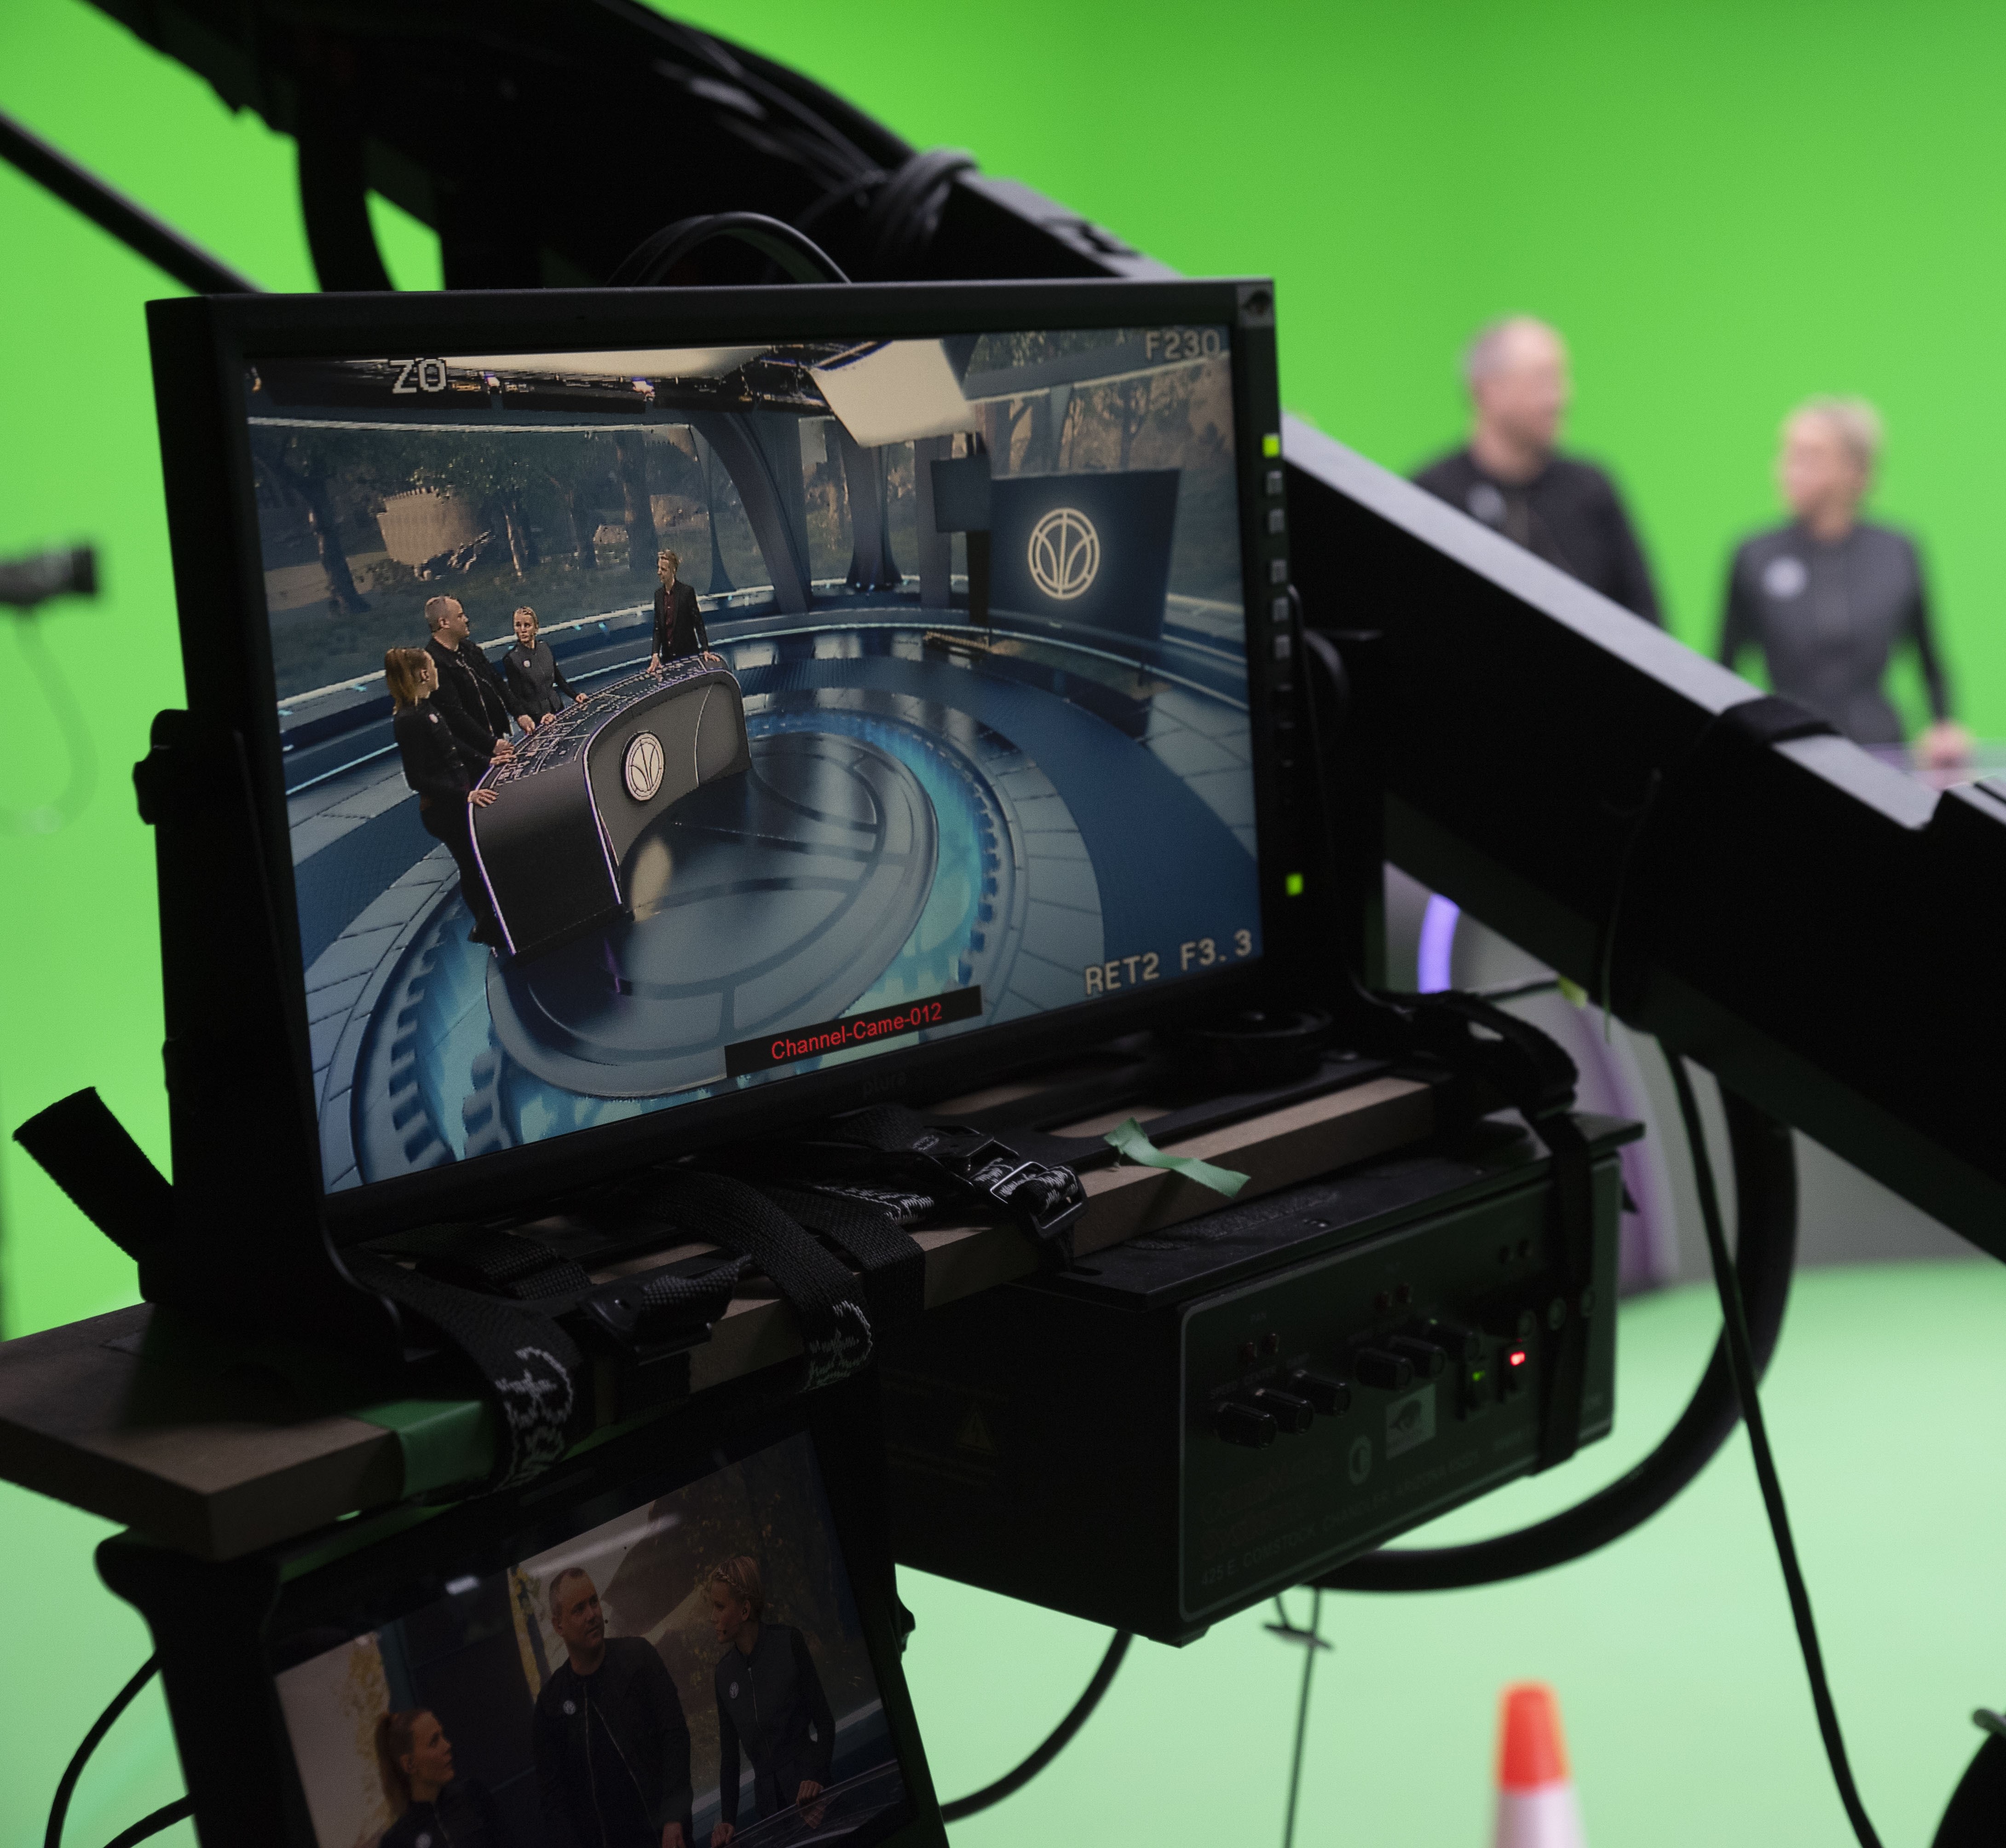 Detail of the camera screen pointing at the virtual studio